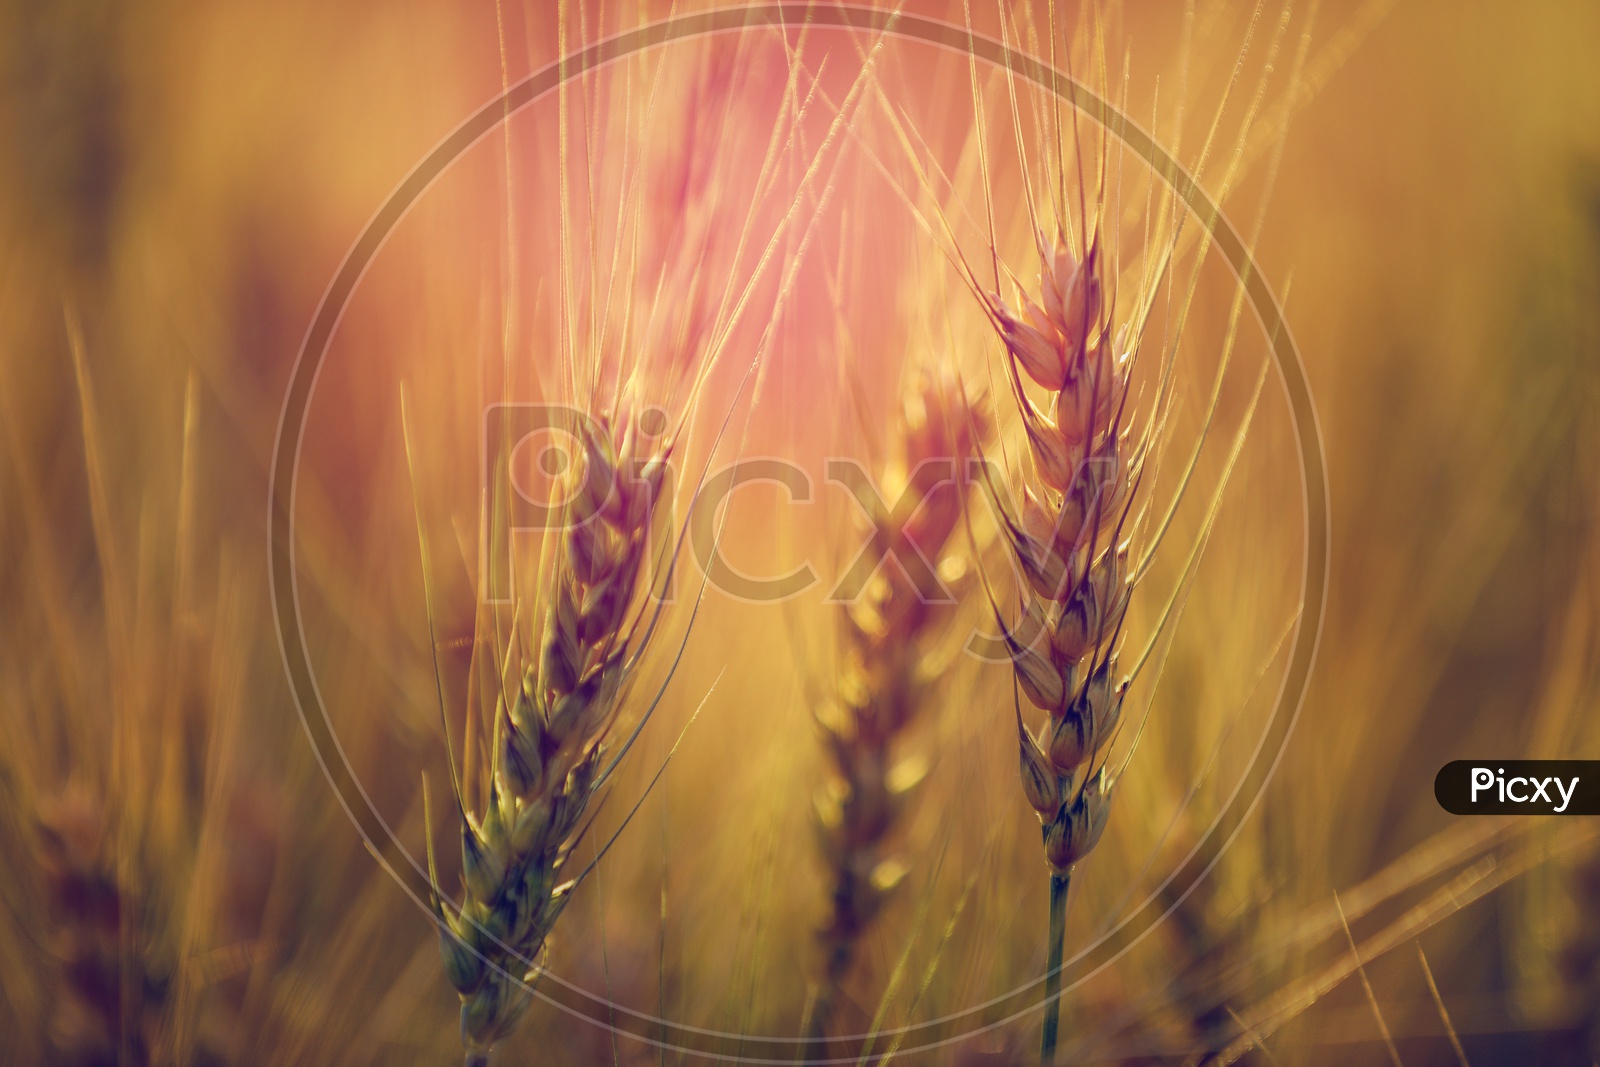 Young Green Wheat Ears Or Spikelets in a Wheat Fields Closeup